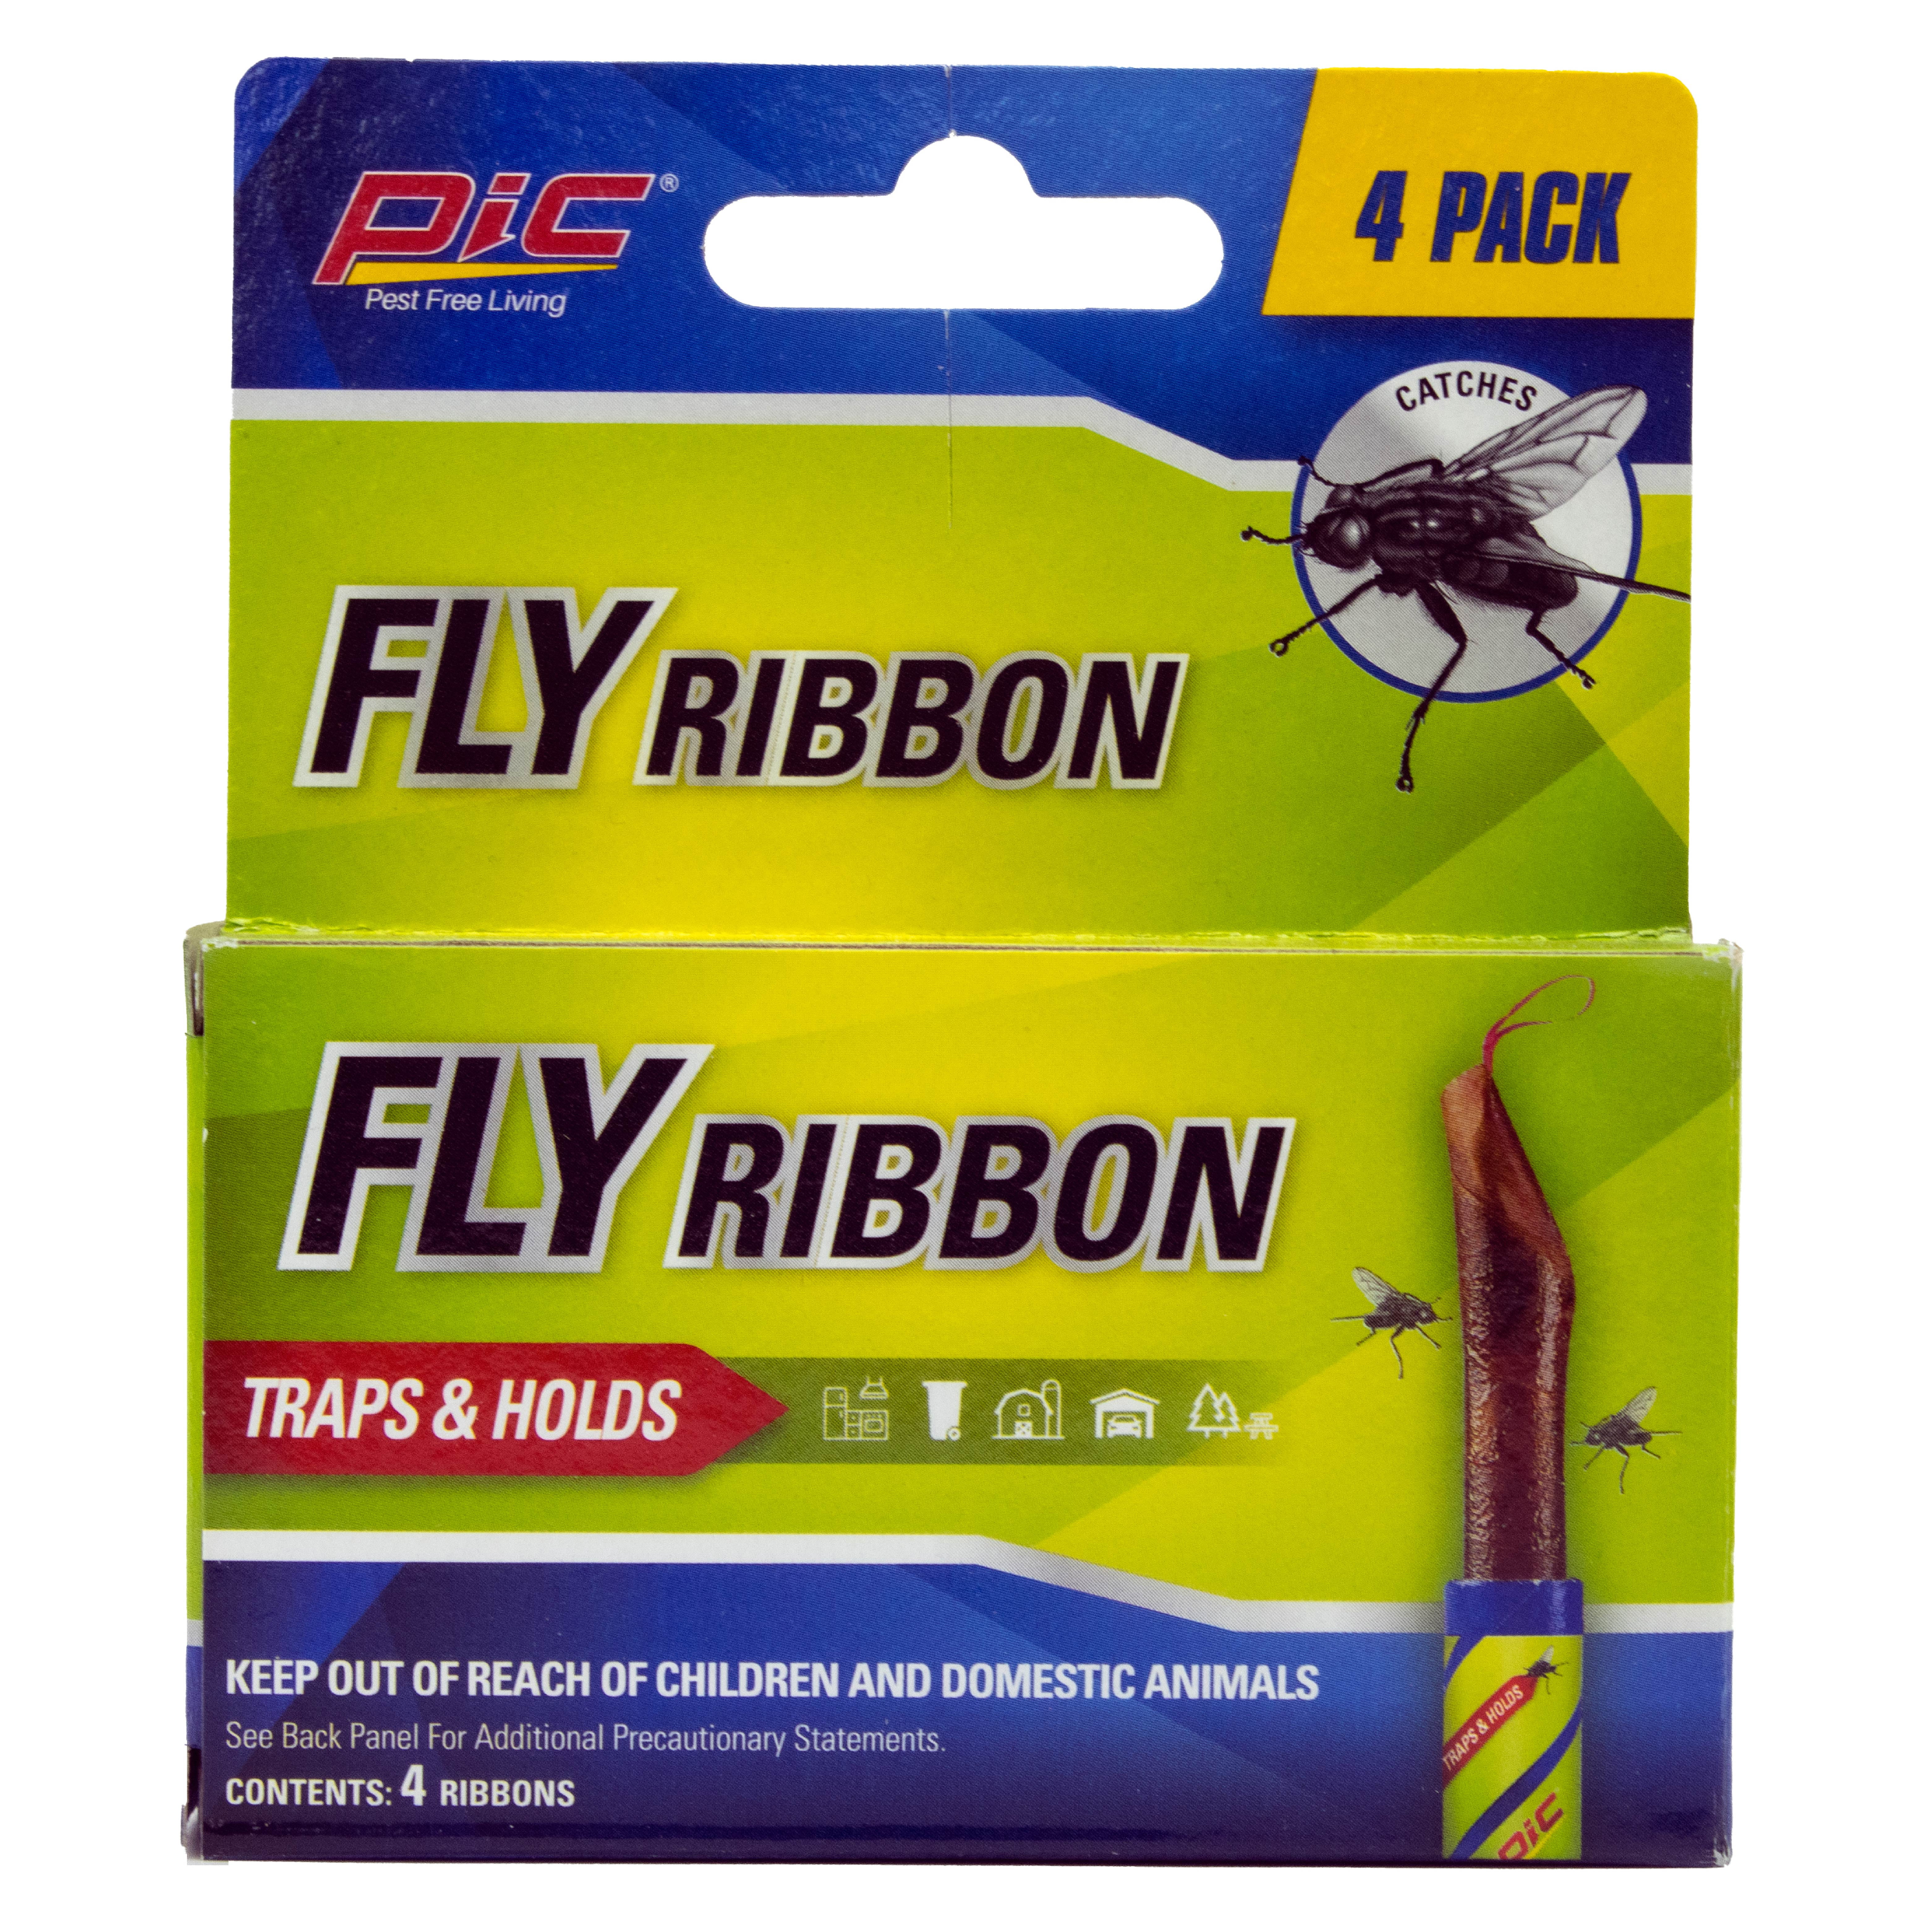 Pic Fly Ribbon, Sticky Flying Insect Trap, Fly Trap, Paper & Glue